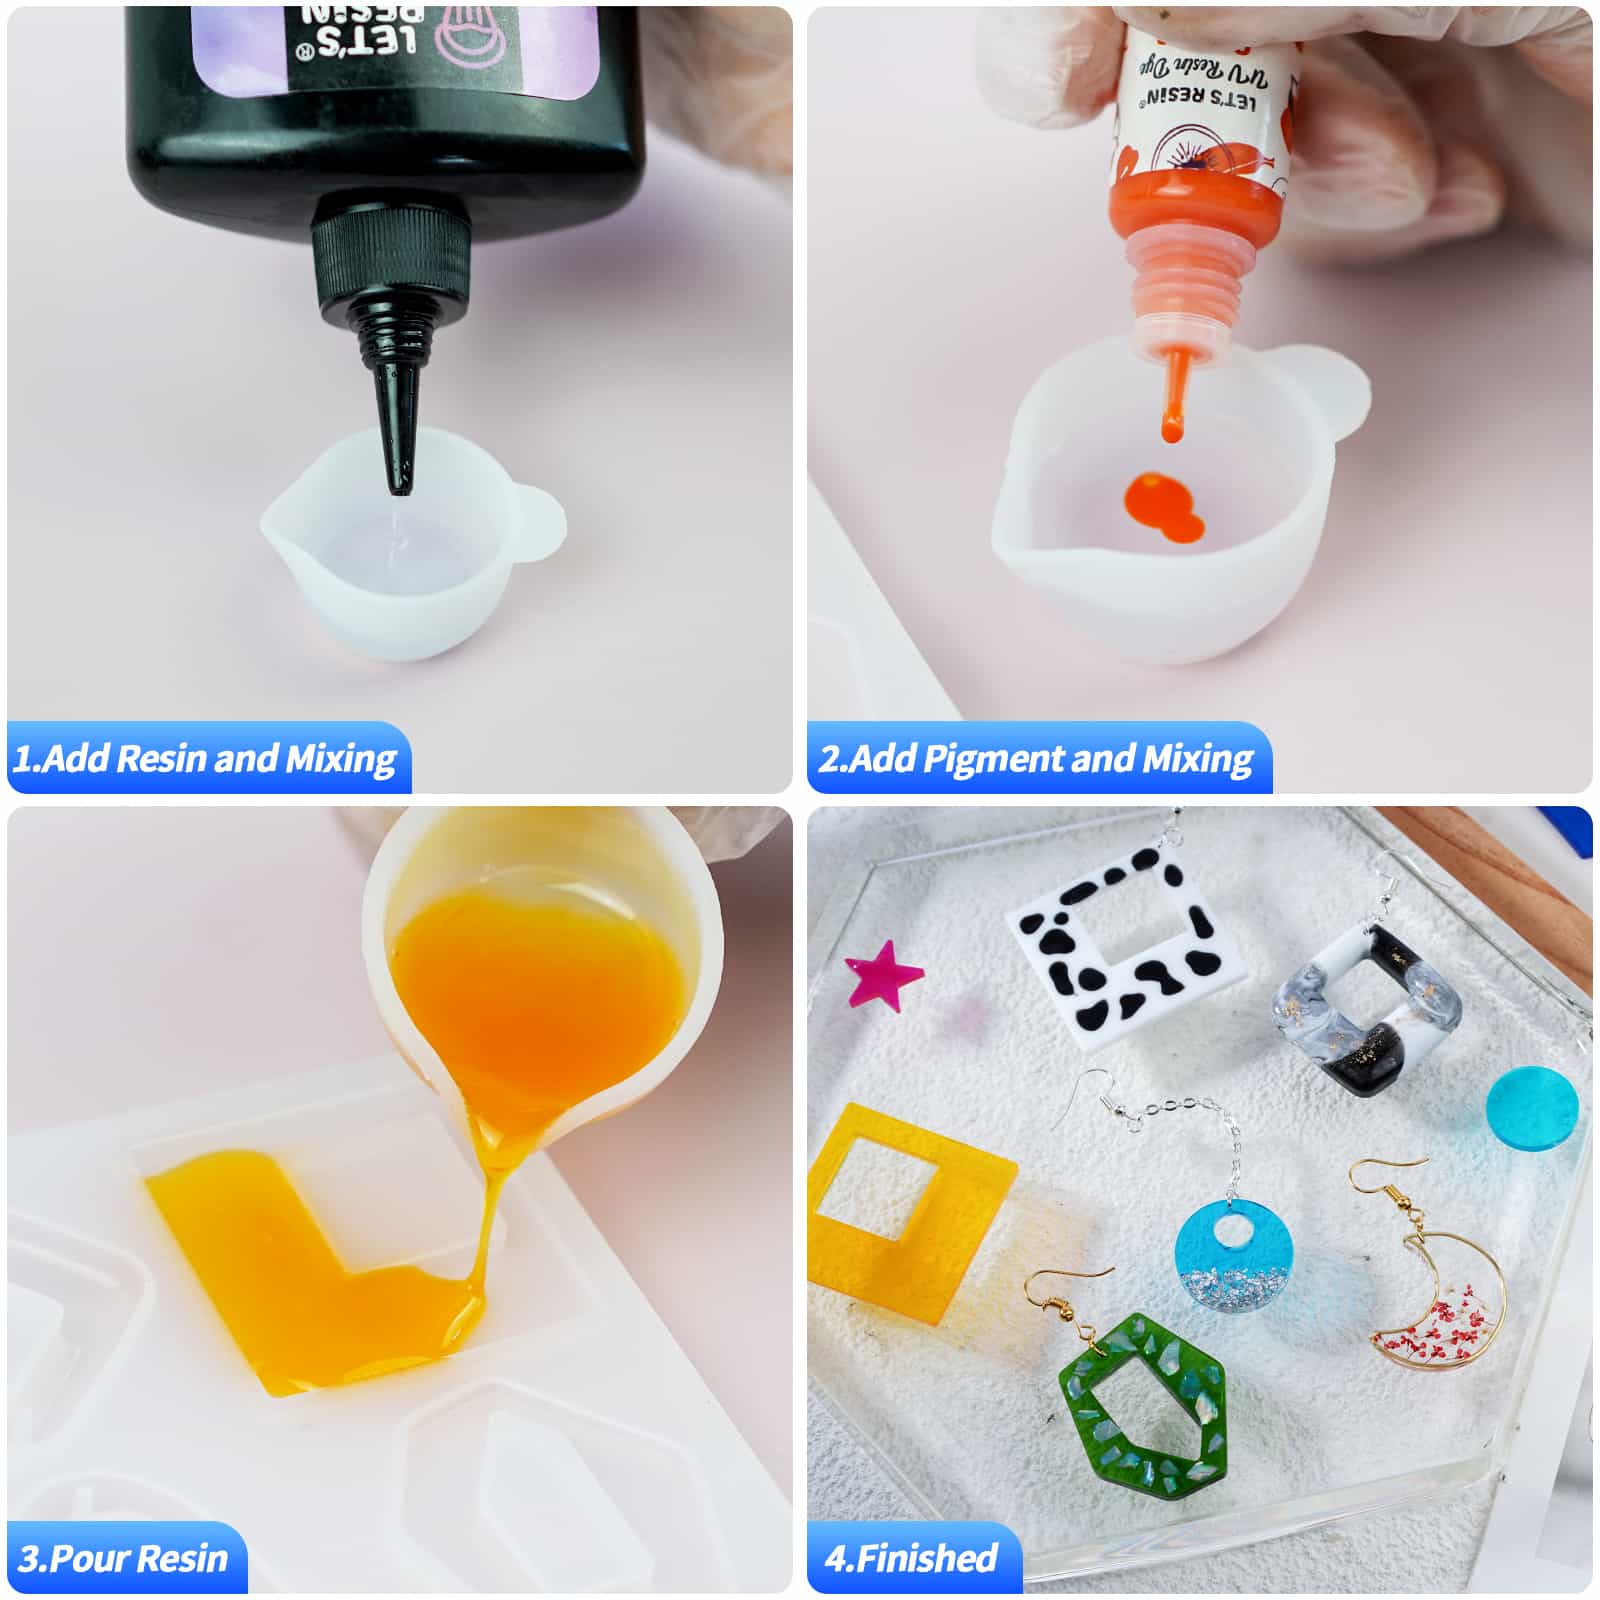 132Pcs Resin Earring Molds,7 Pairs Dripping Blood Resin Jewelry Silicone  Molds with Earring Hooks and Backs Jump Rings,for Epoxy Resin Casting